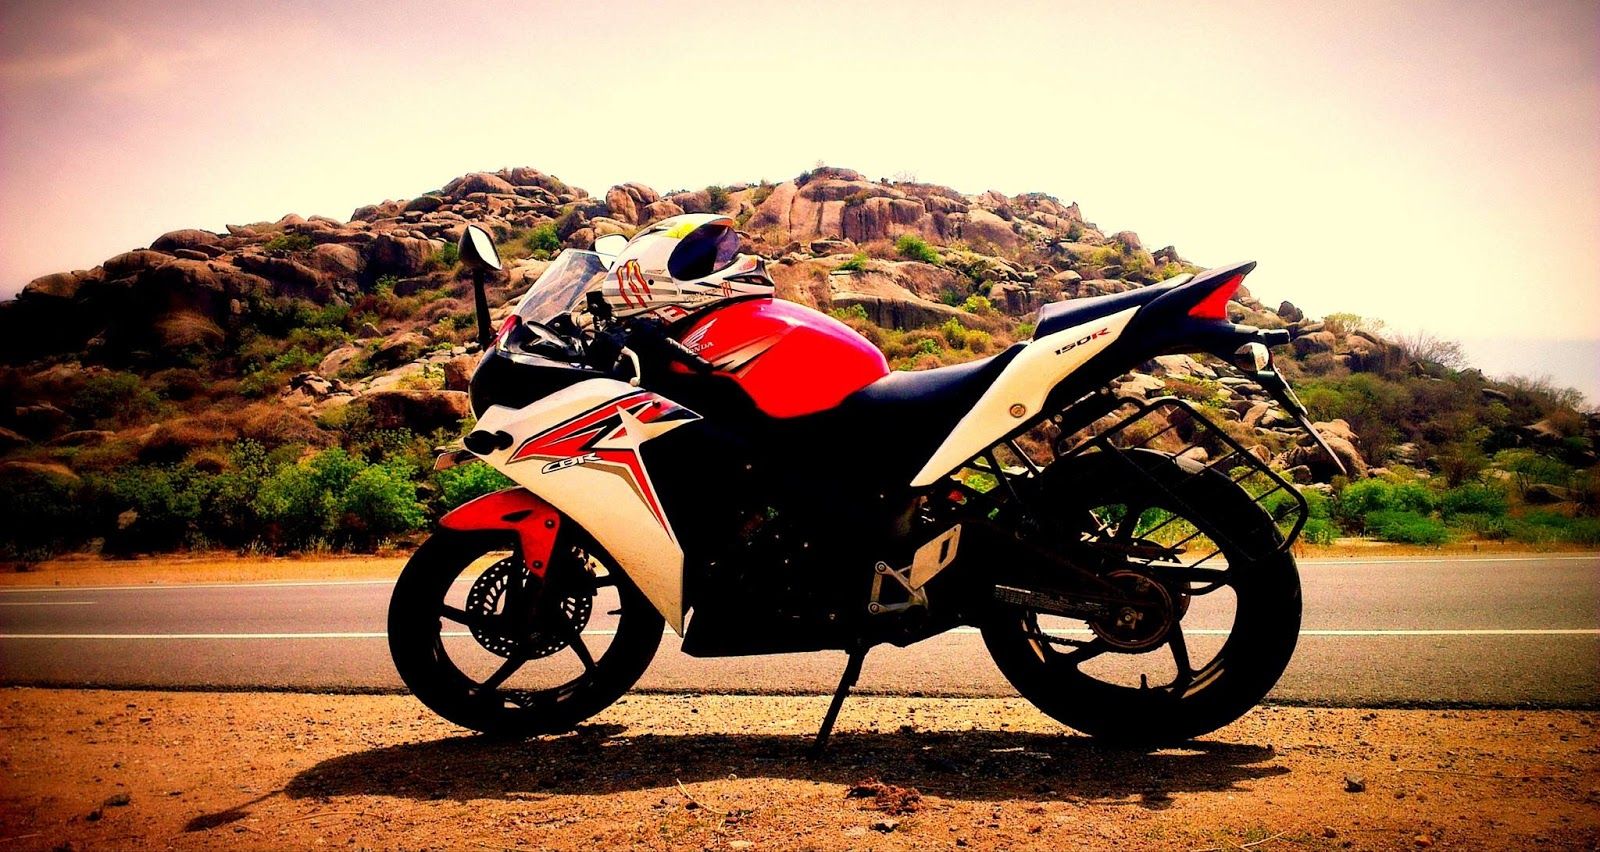 Download Honda Cbr Wallpapers To Your Cell Phone Cbr, - Honda Cbr 150r Hd , HD Wallpaper & Backgrounds